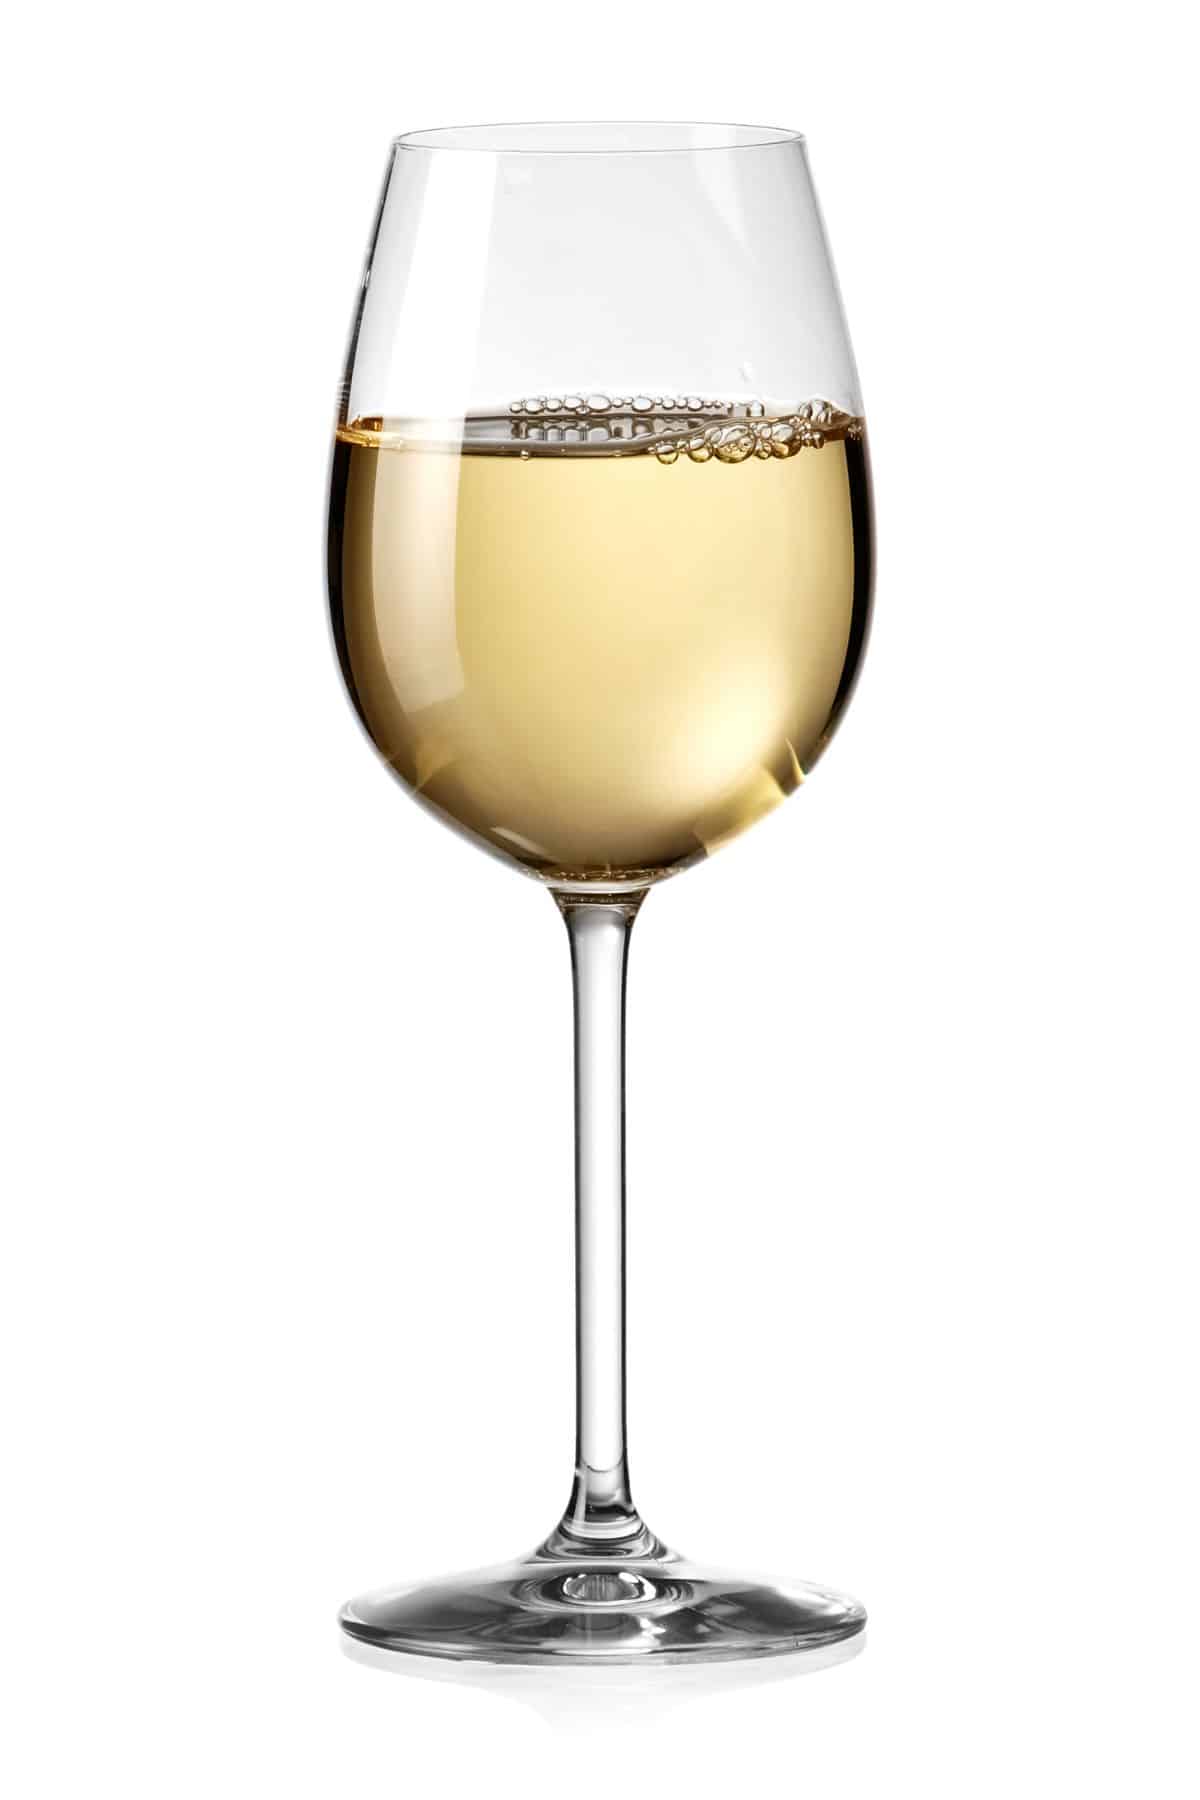 A glass of white wine on a white background.